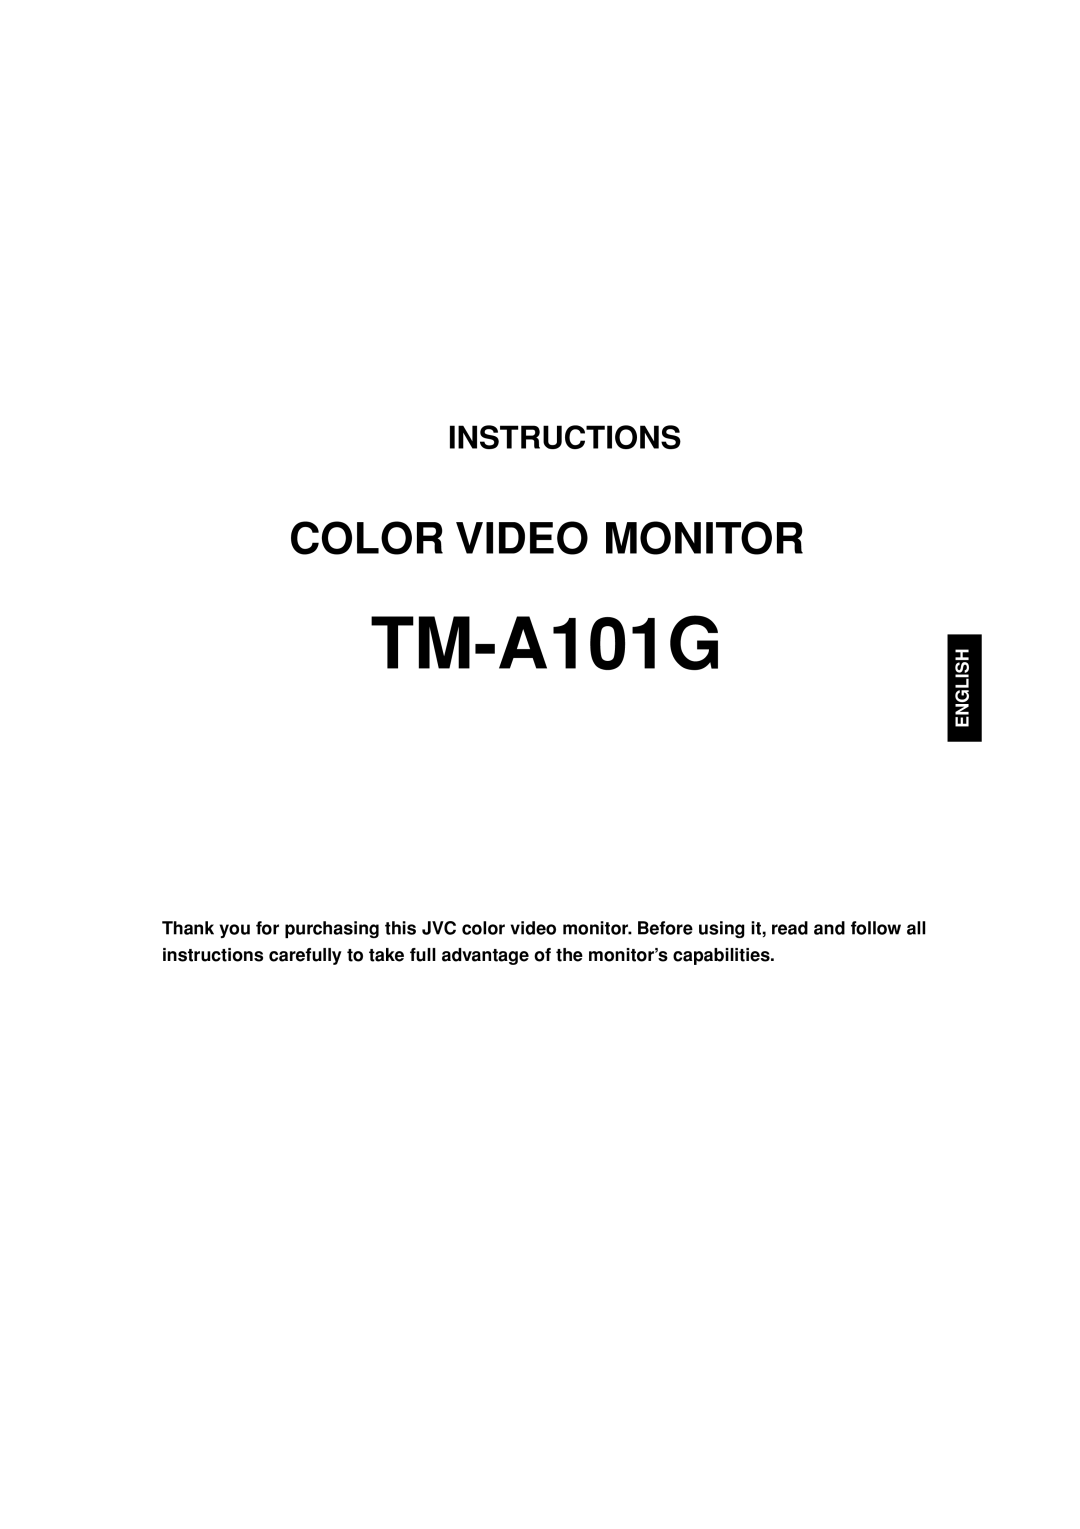 JVC TM-A101G manual Color Video Monitor, Instructions, English 